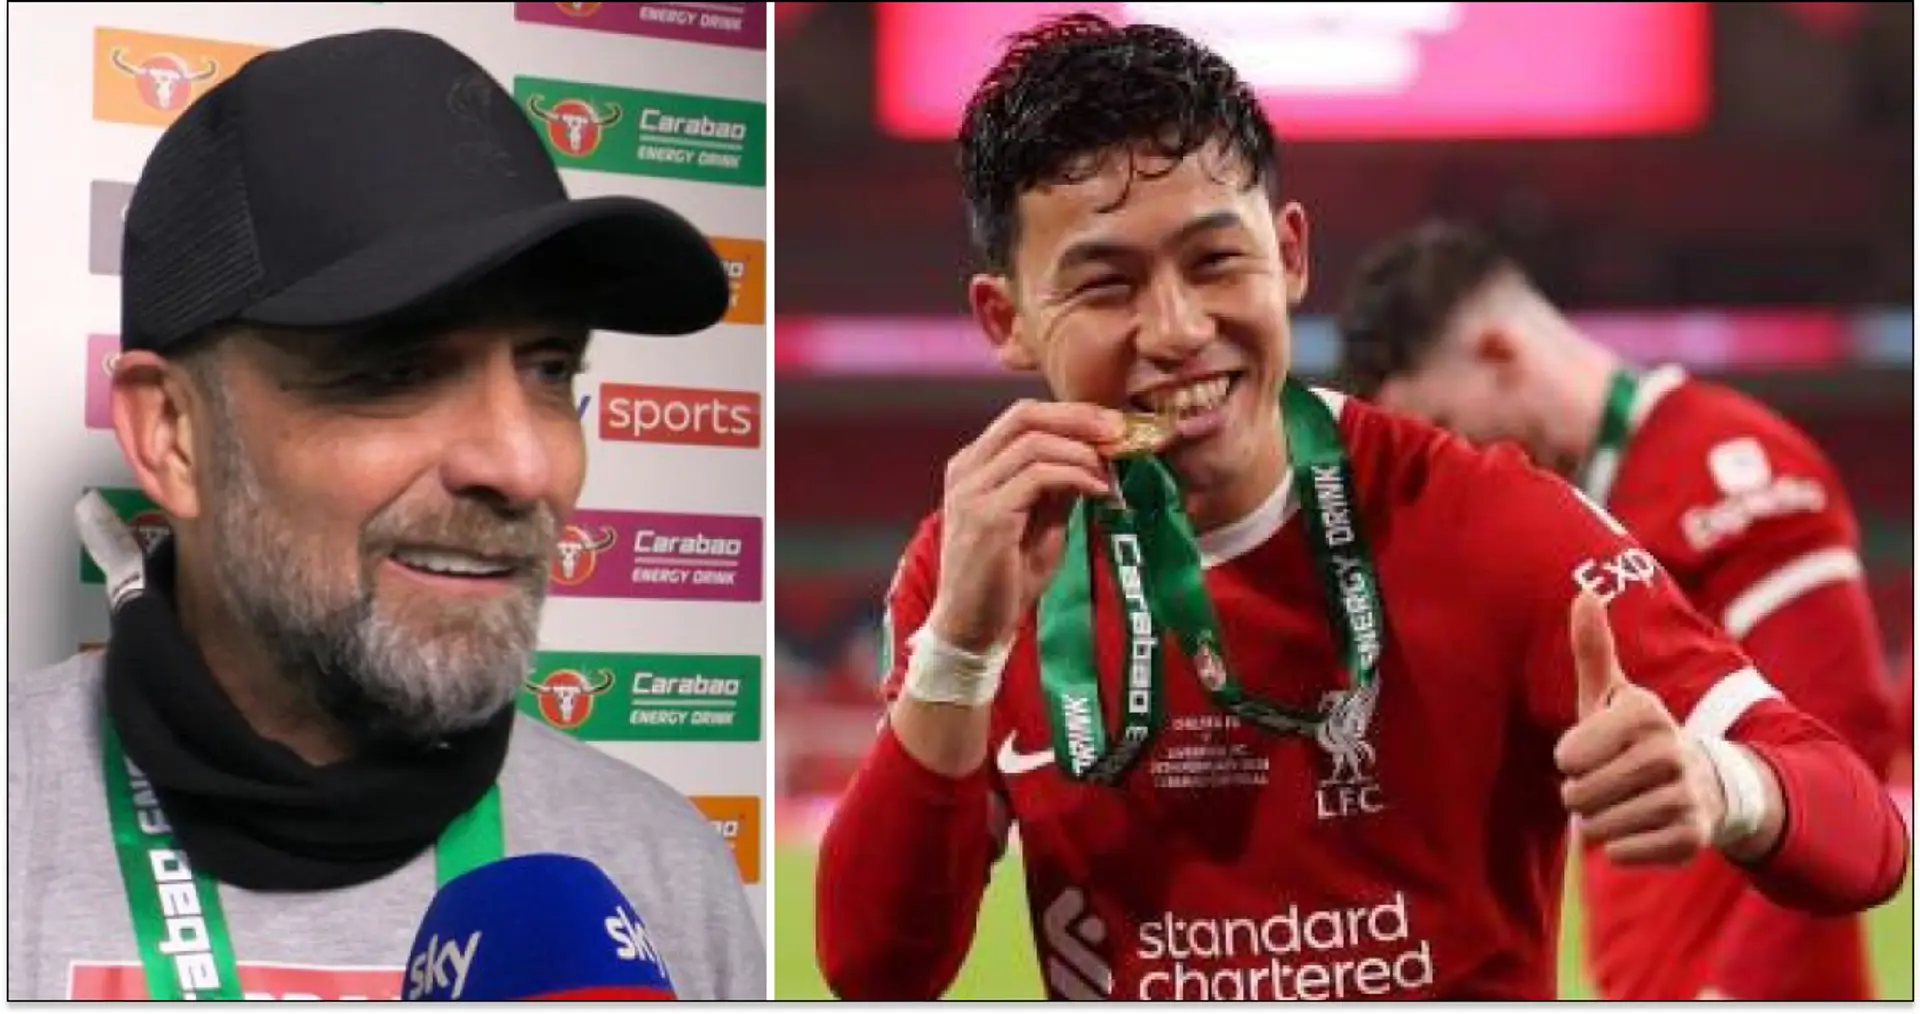 Klopp backs Endo to stay at Liverpool beyond 2027: 'He might be 31 but he's a machine'